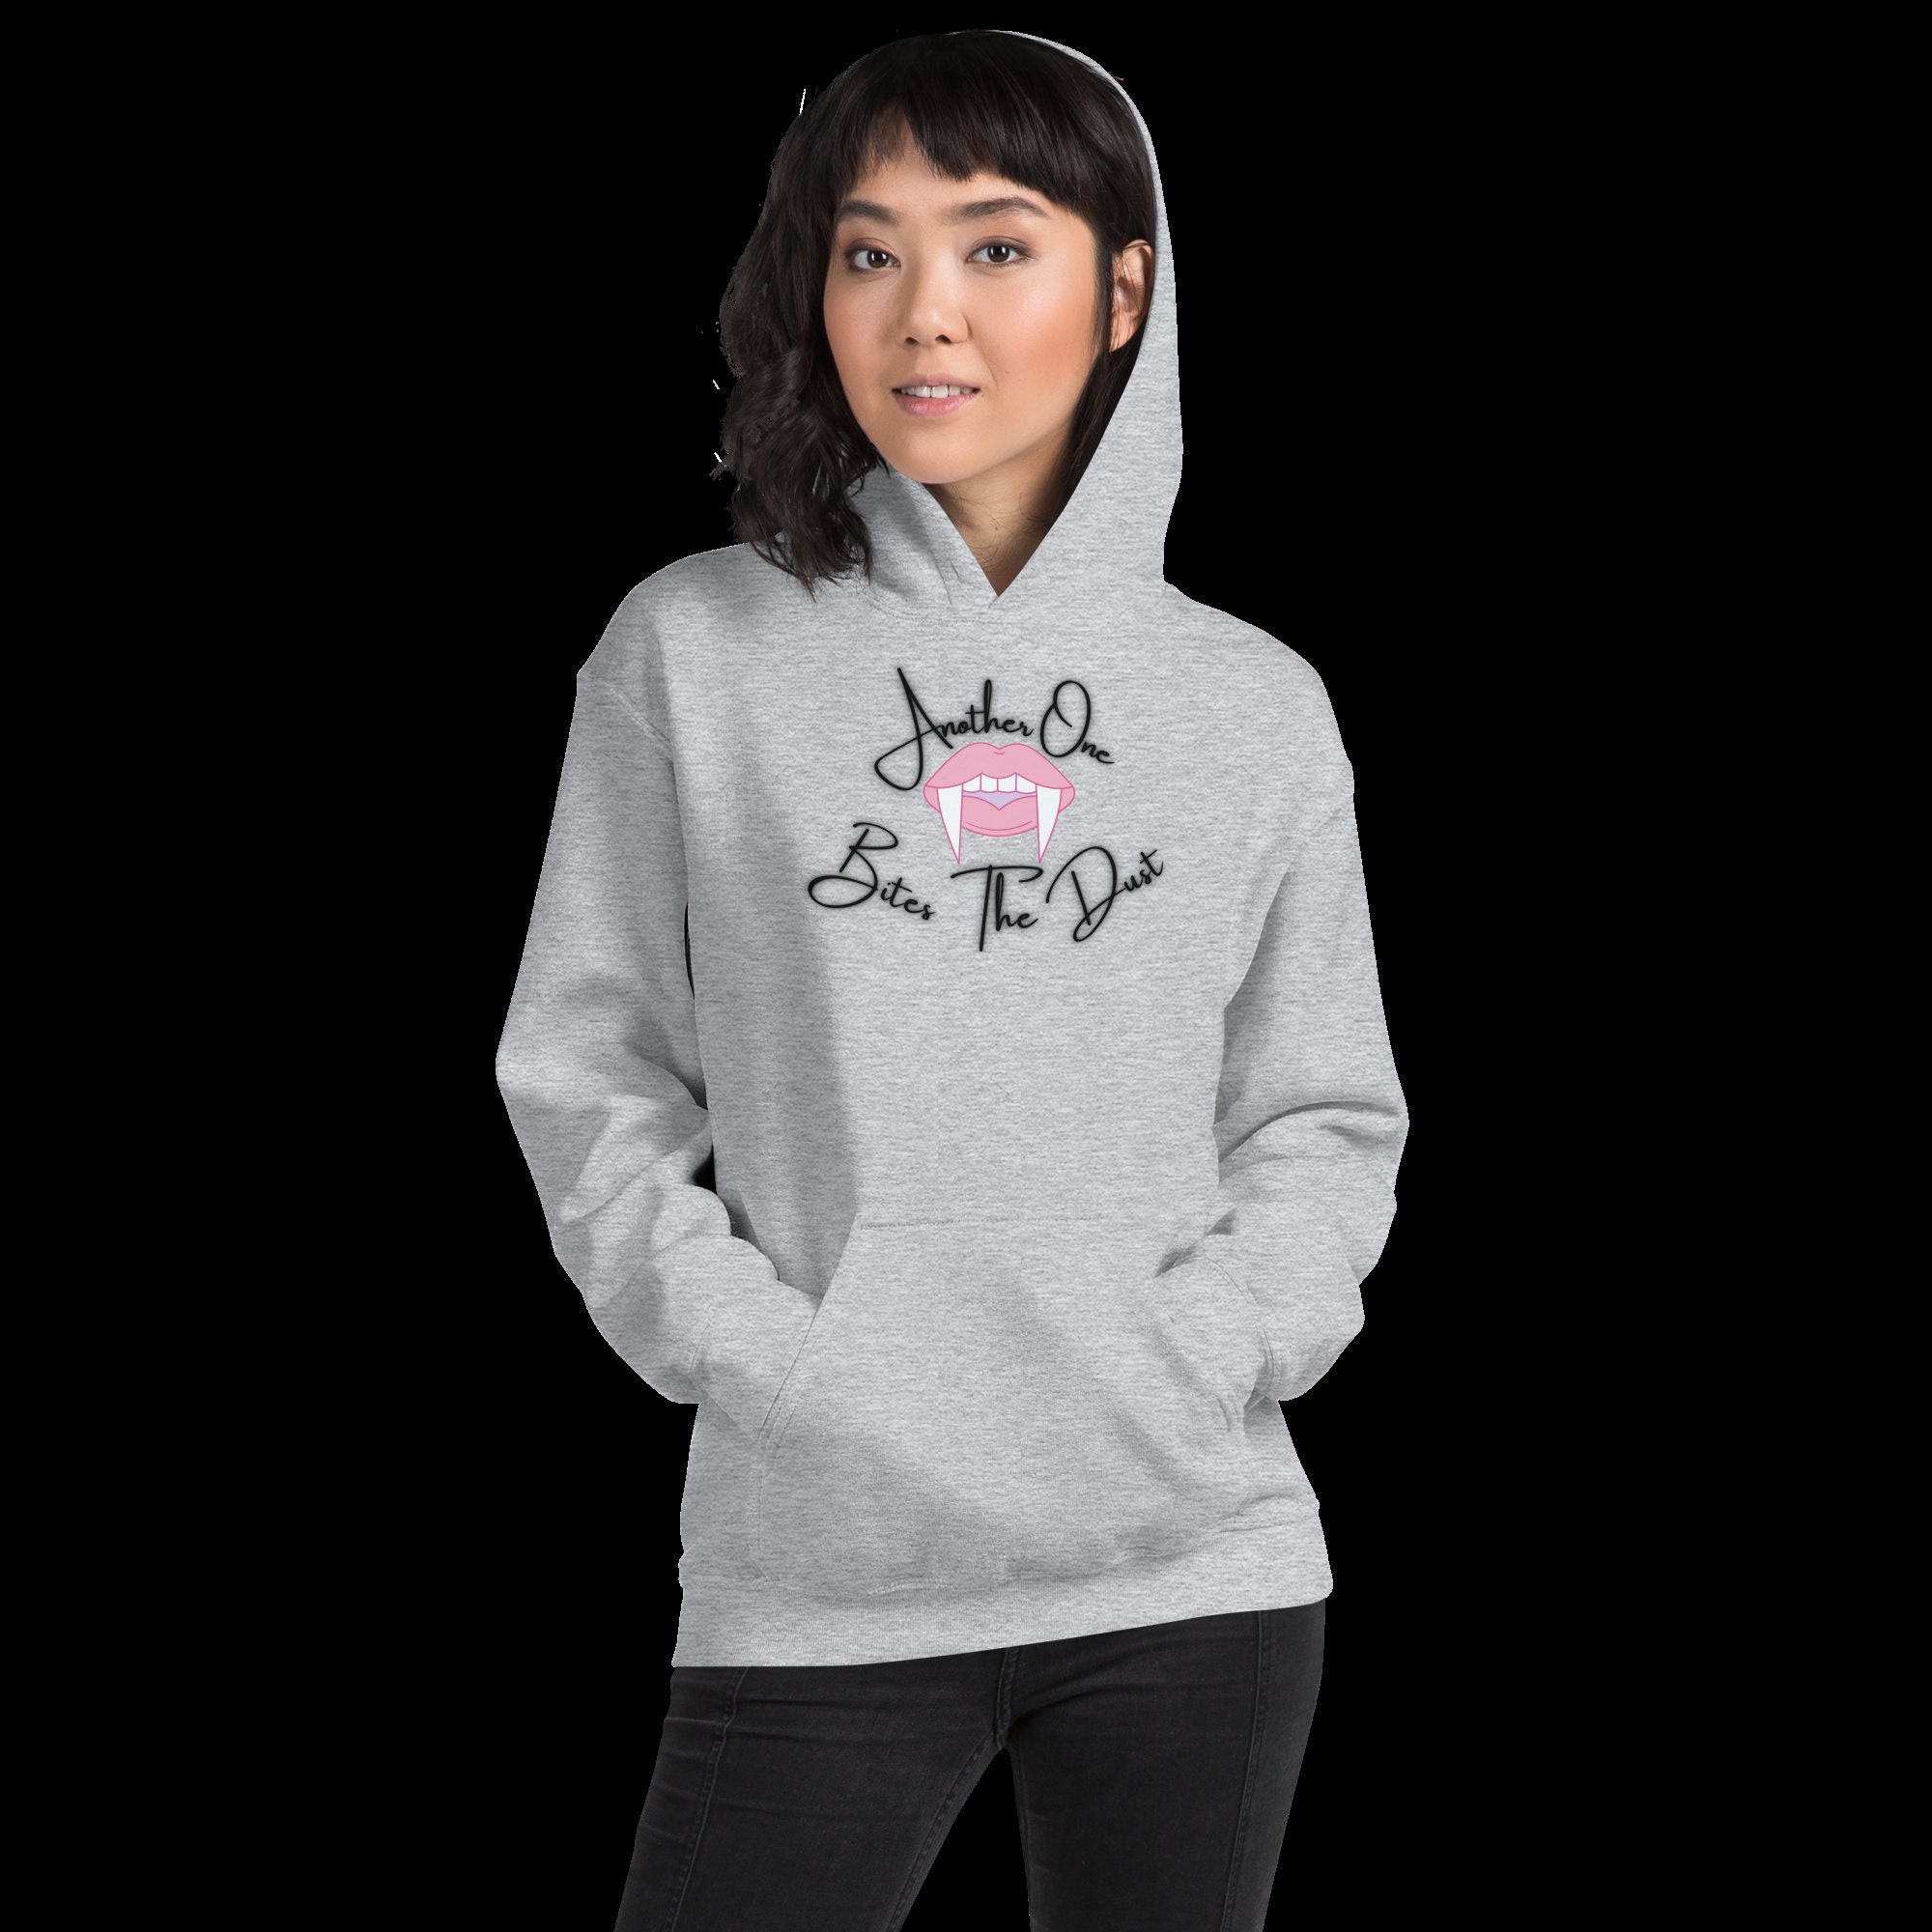  Queen Another one Bites the Dust Pullover Hoodie : Clothing,  Shoes & Jewelry